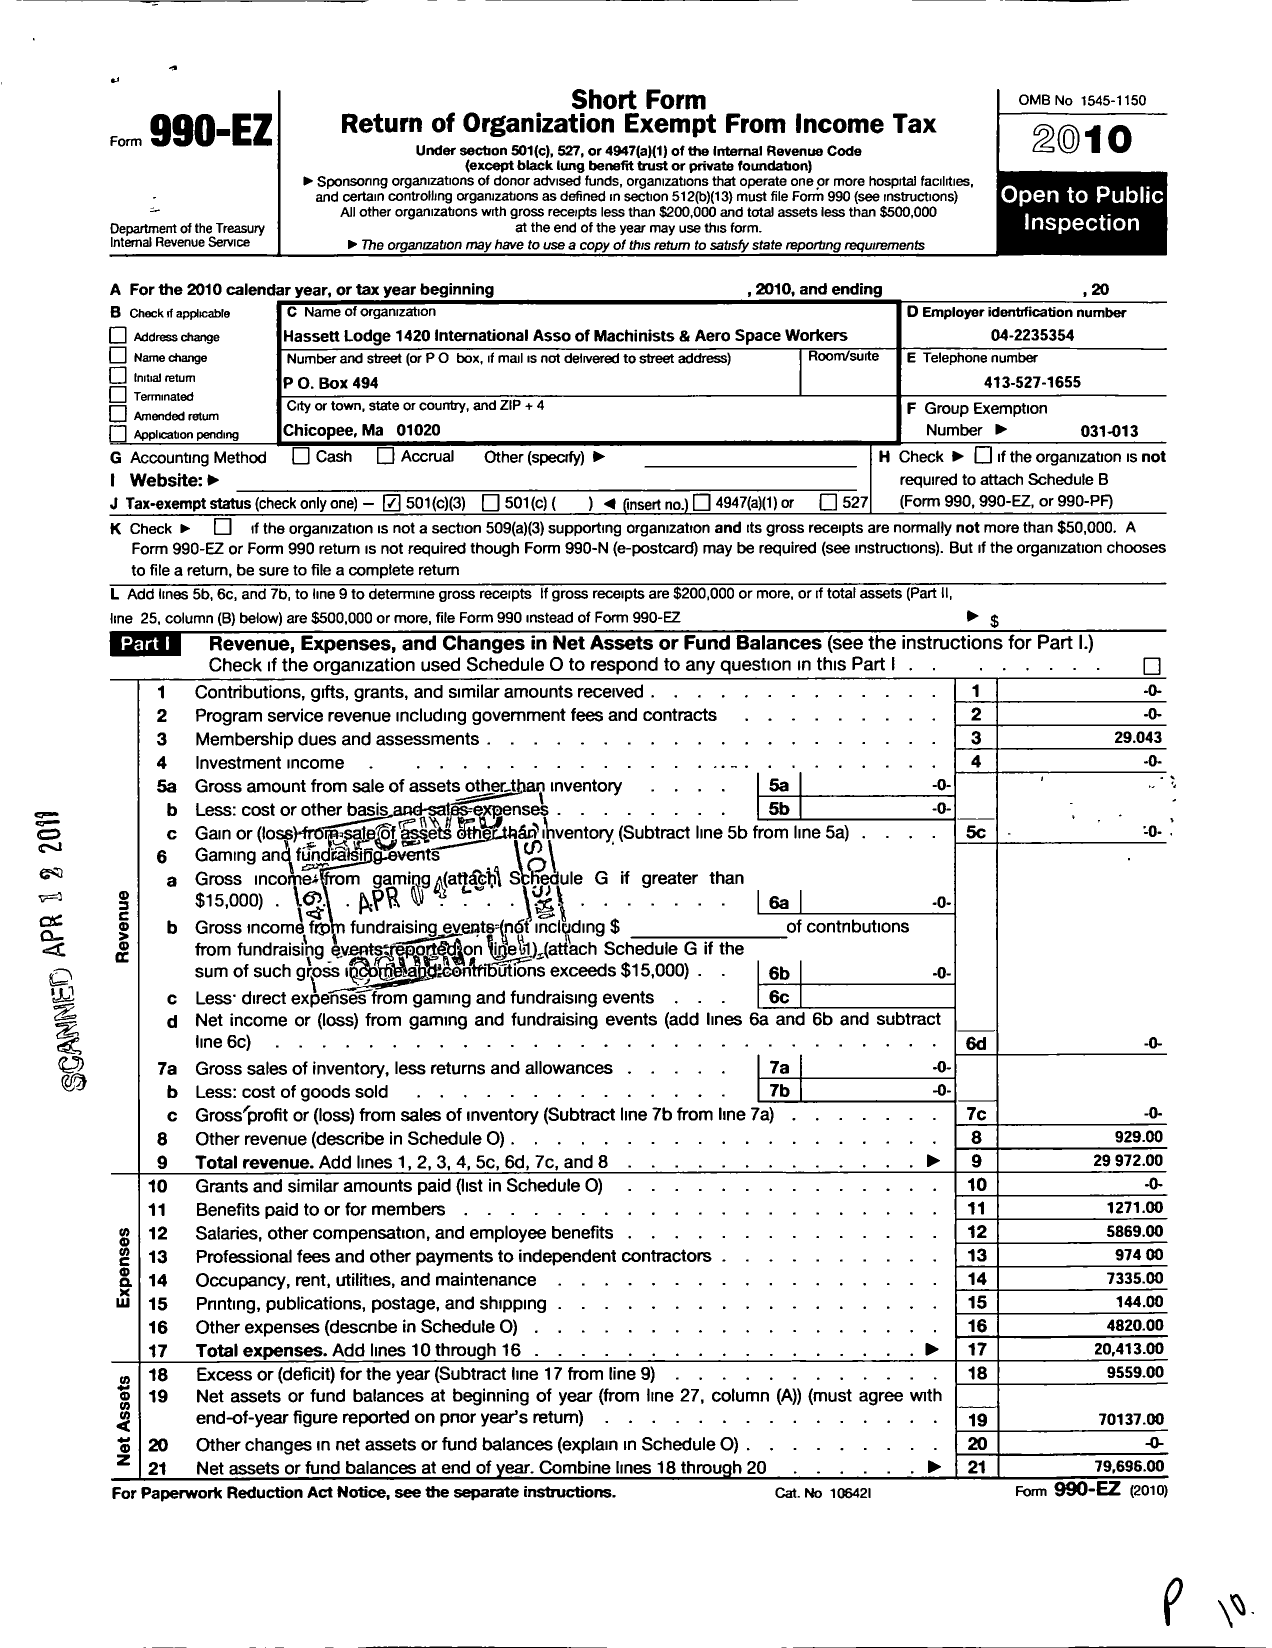 Image of first page of 2010 Form 990EZ for International Association of Machinists and Aerospace Workers - 1420 Hassett Lodge